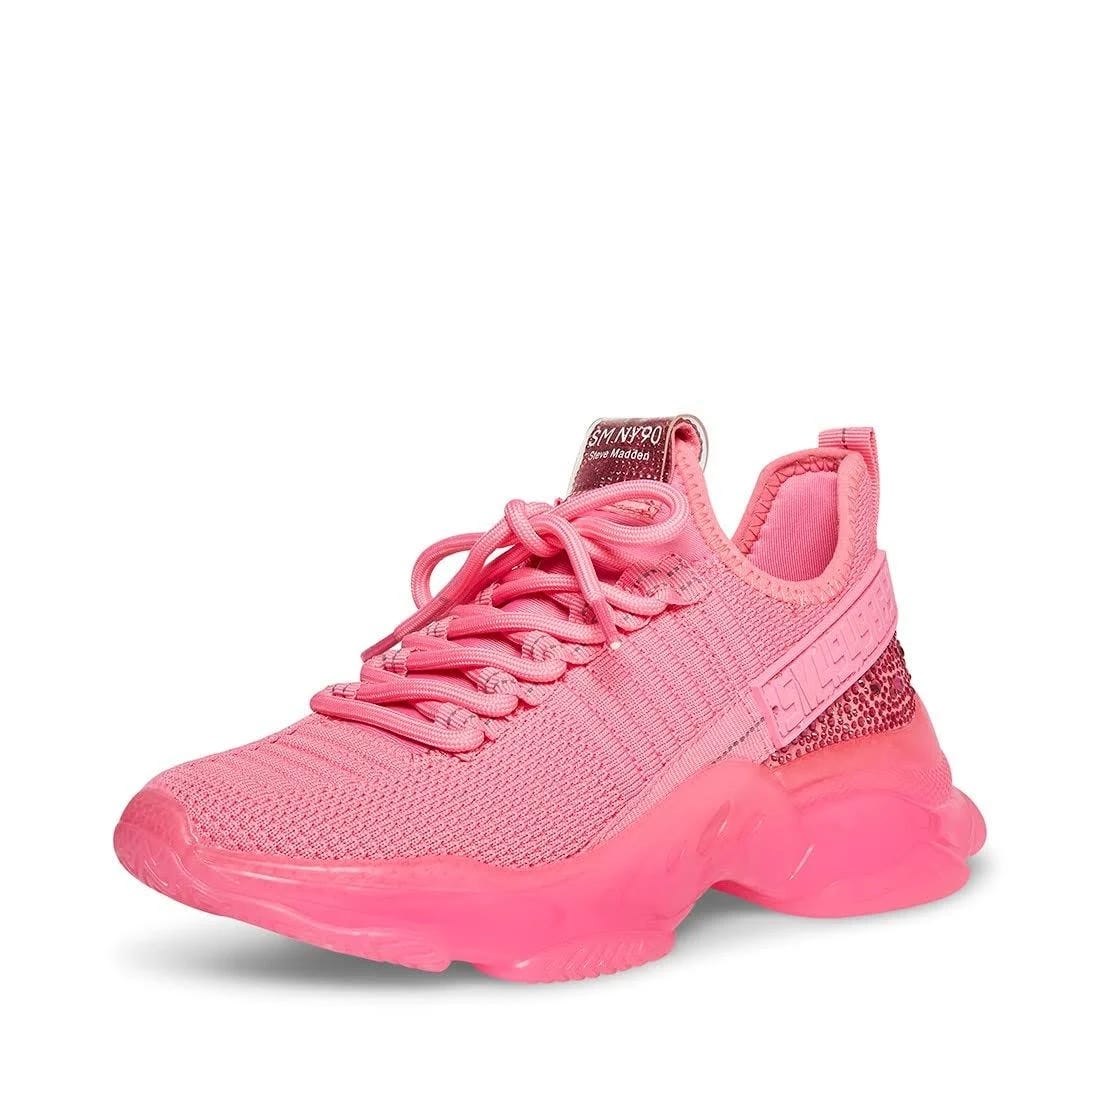 Stylish Pink Rhinestone Sneakers with Lace-Up | Image